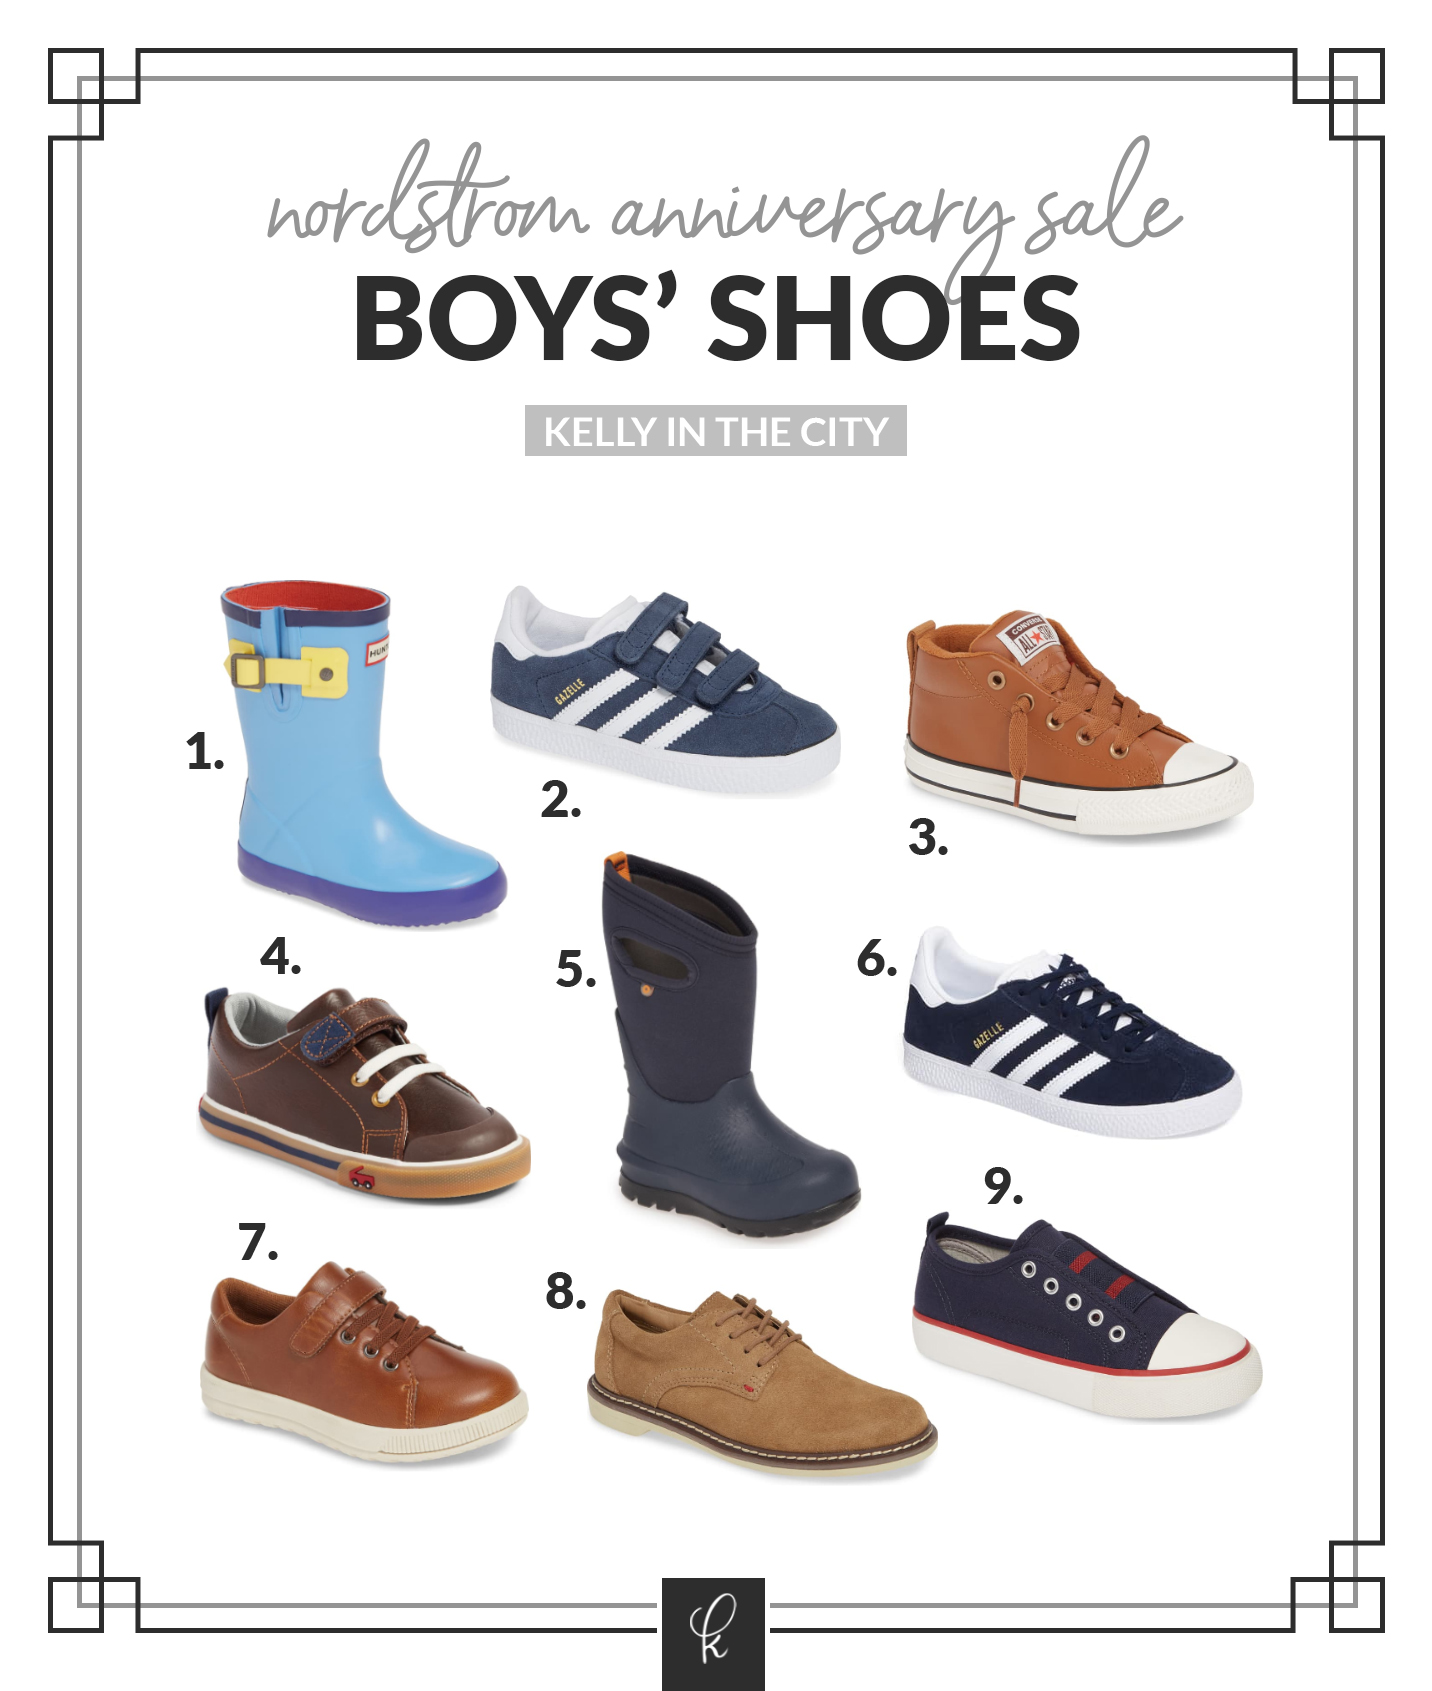 Emma and Lucy's Nordstrom Anniversary Sale Picks of boys shoes